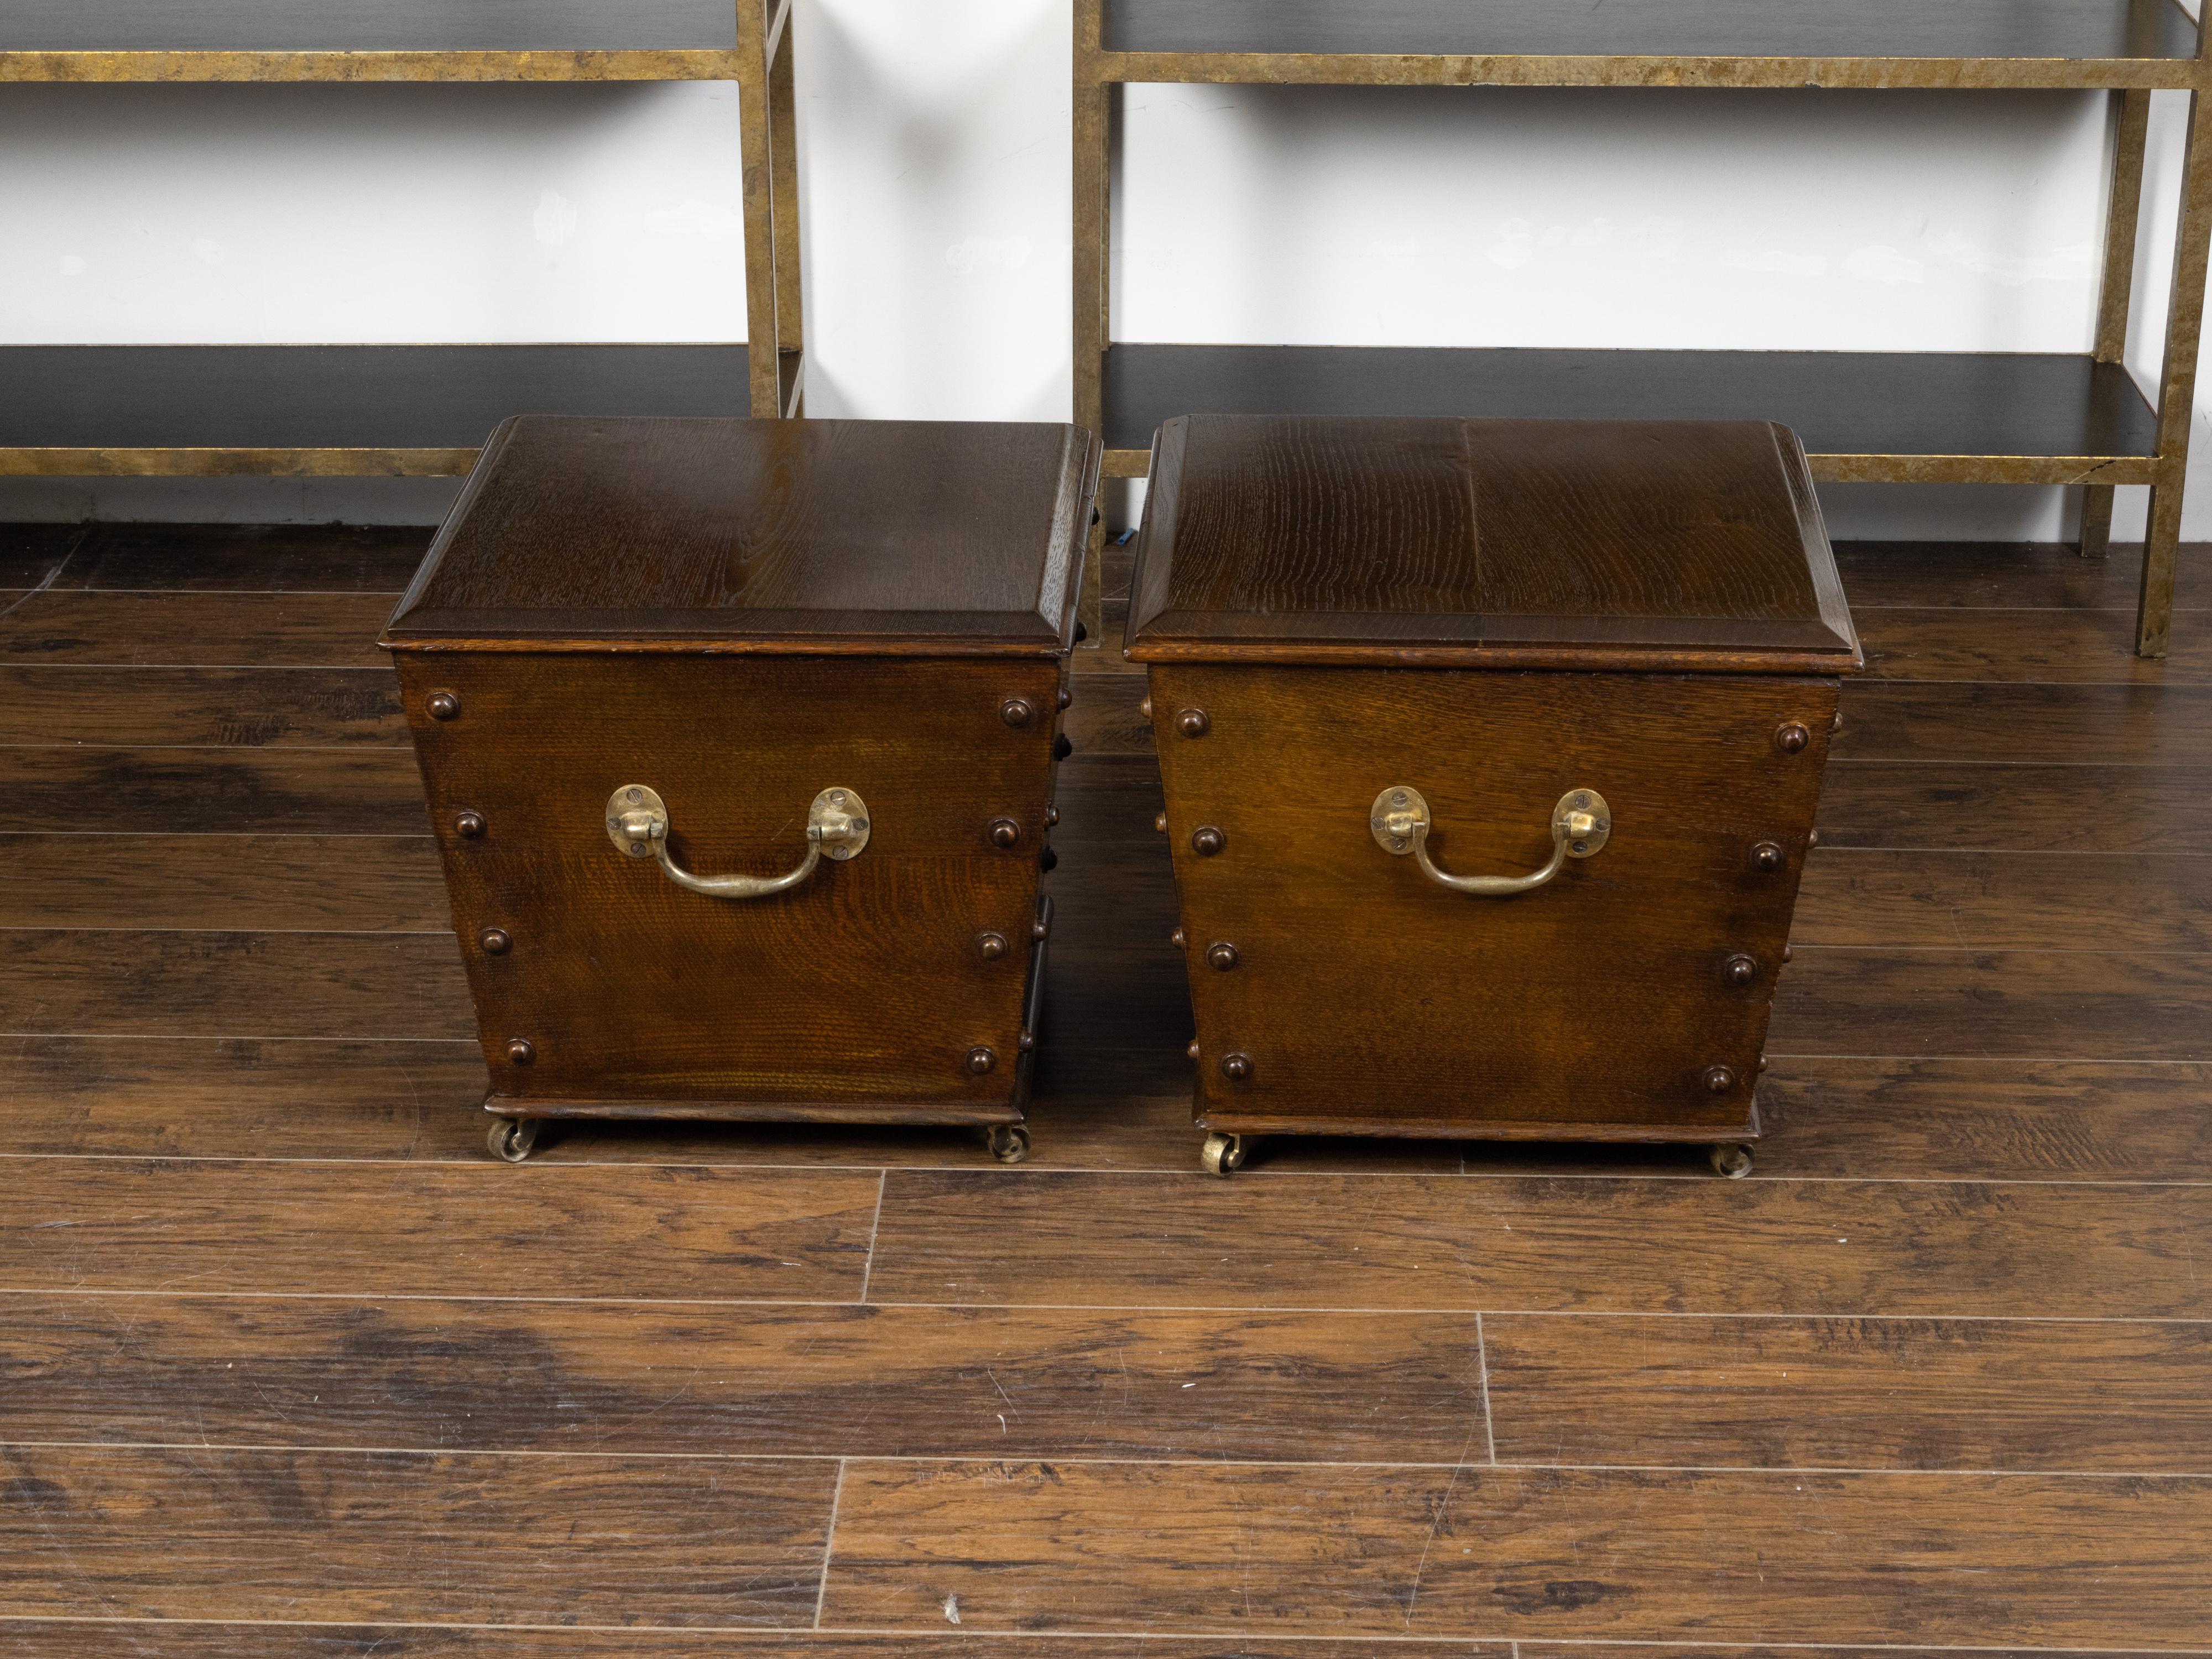 Two English vintage oak cellarettes from the mid 20th century with brass hardware, sold individually $3,995 each. Created in England during the first half of the 20th century, these cellarettes each feature a square top with beveled edges opening to